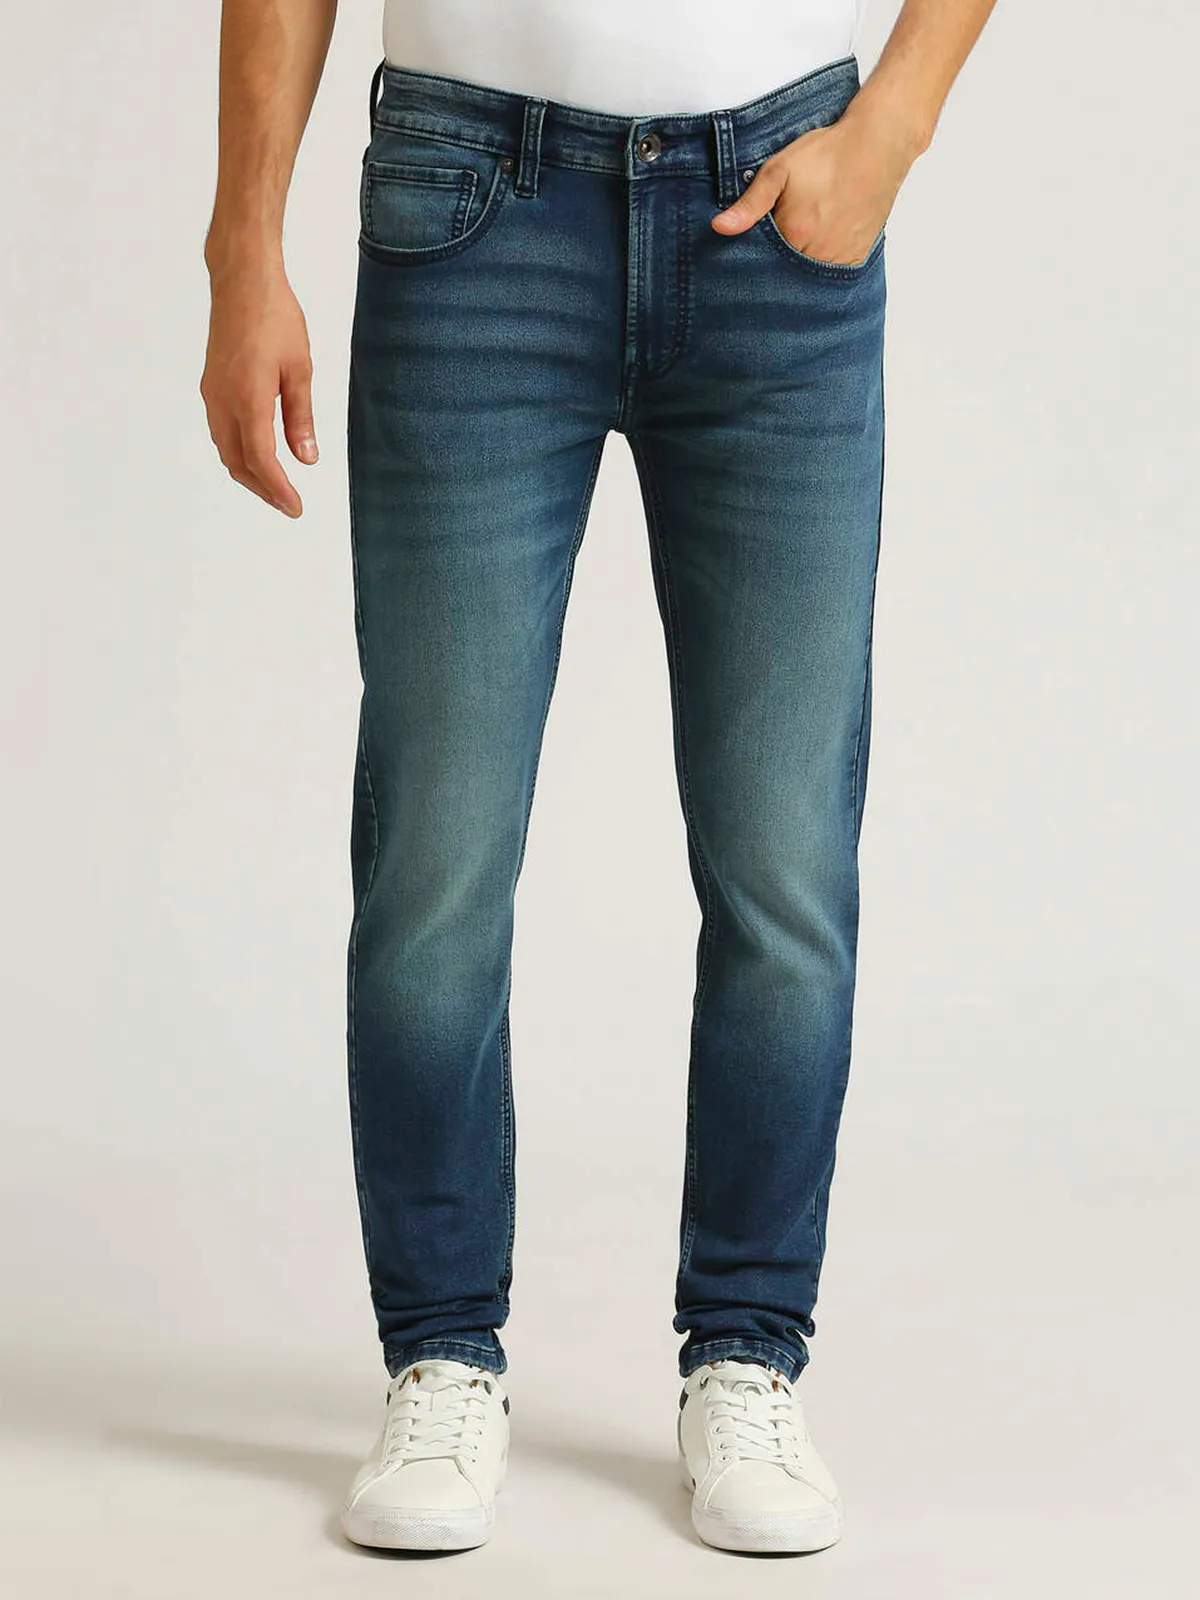 PEPE JEANS blue washed skinny fit jeans